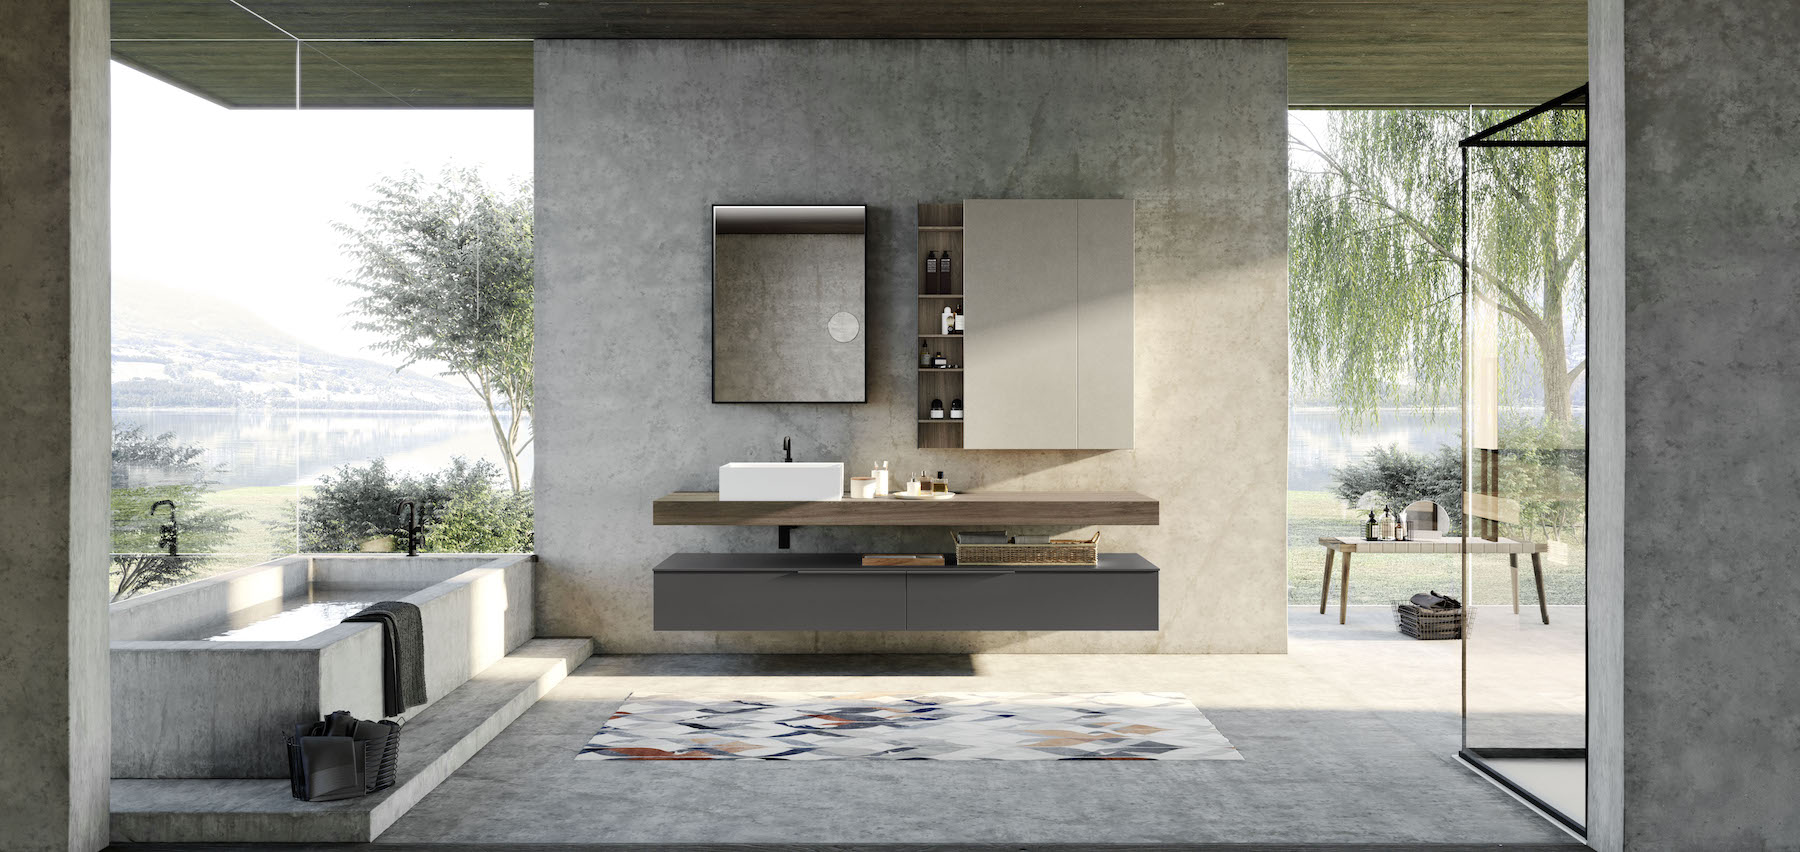 Urban countertop with coordinating open and closed bathroom storage